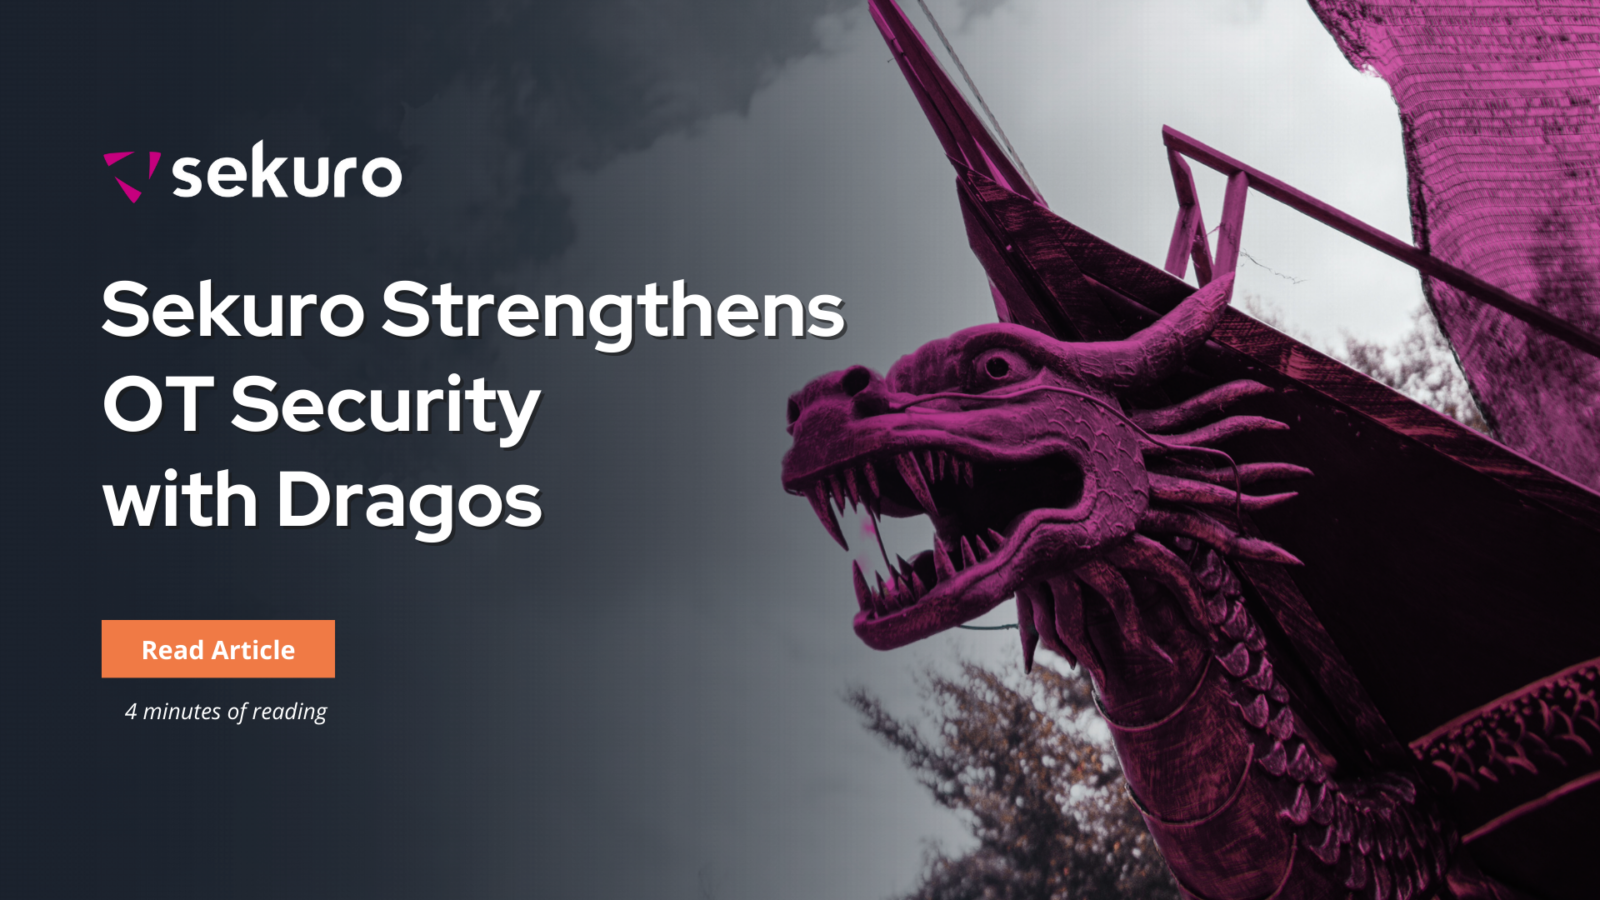 Sekuro and Dragos partner together to provide Operational Technology services.